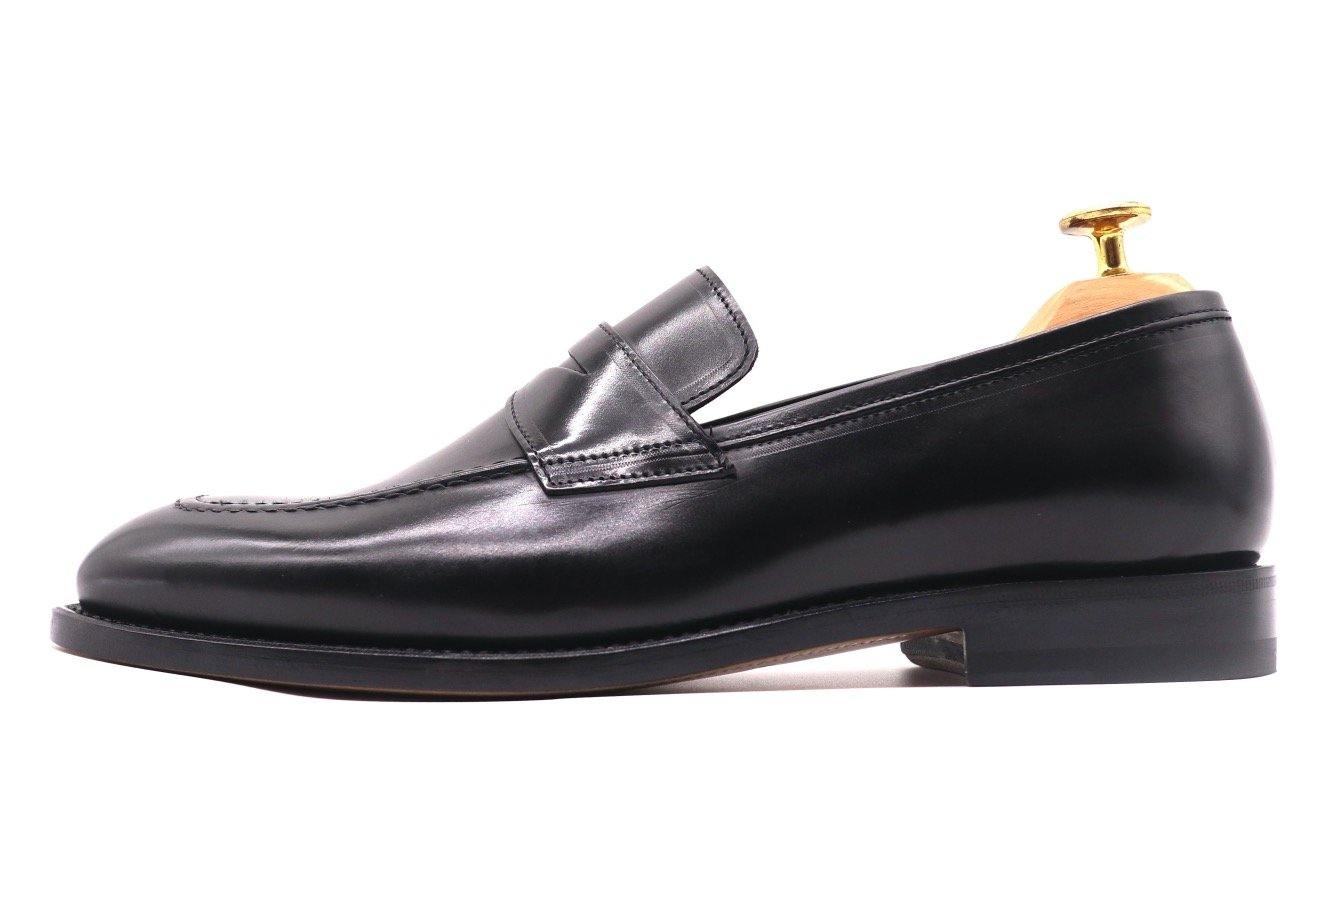 Lorens Men's Calf Leather Loafers - Black